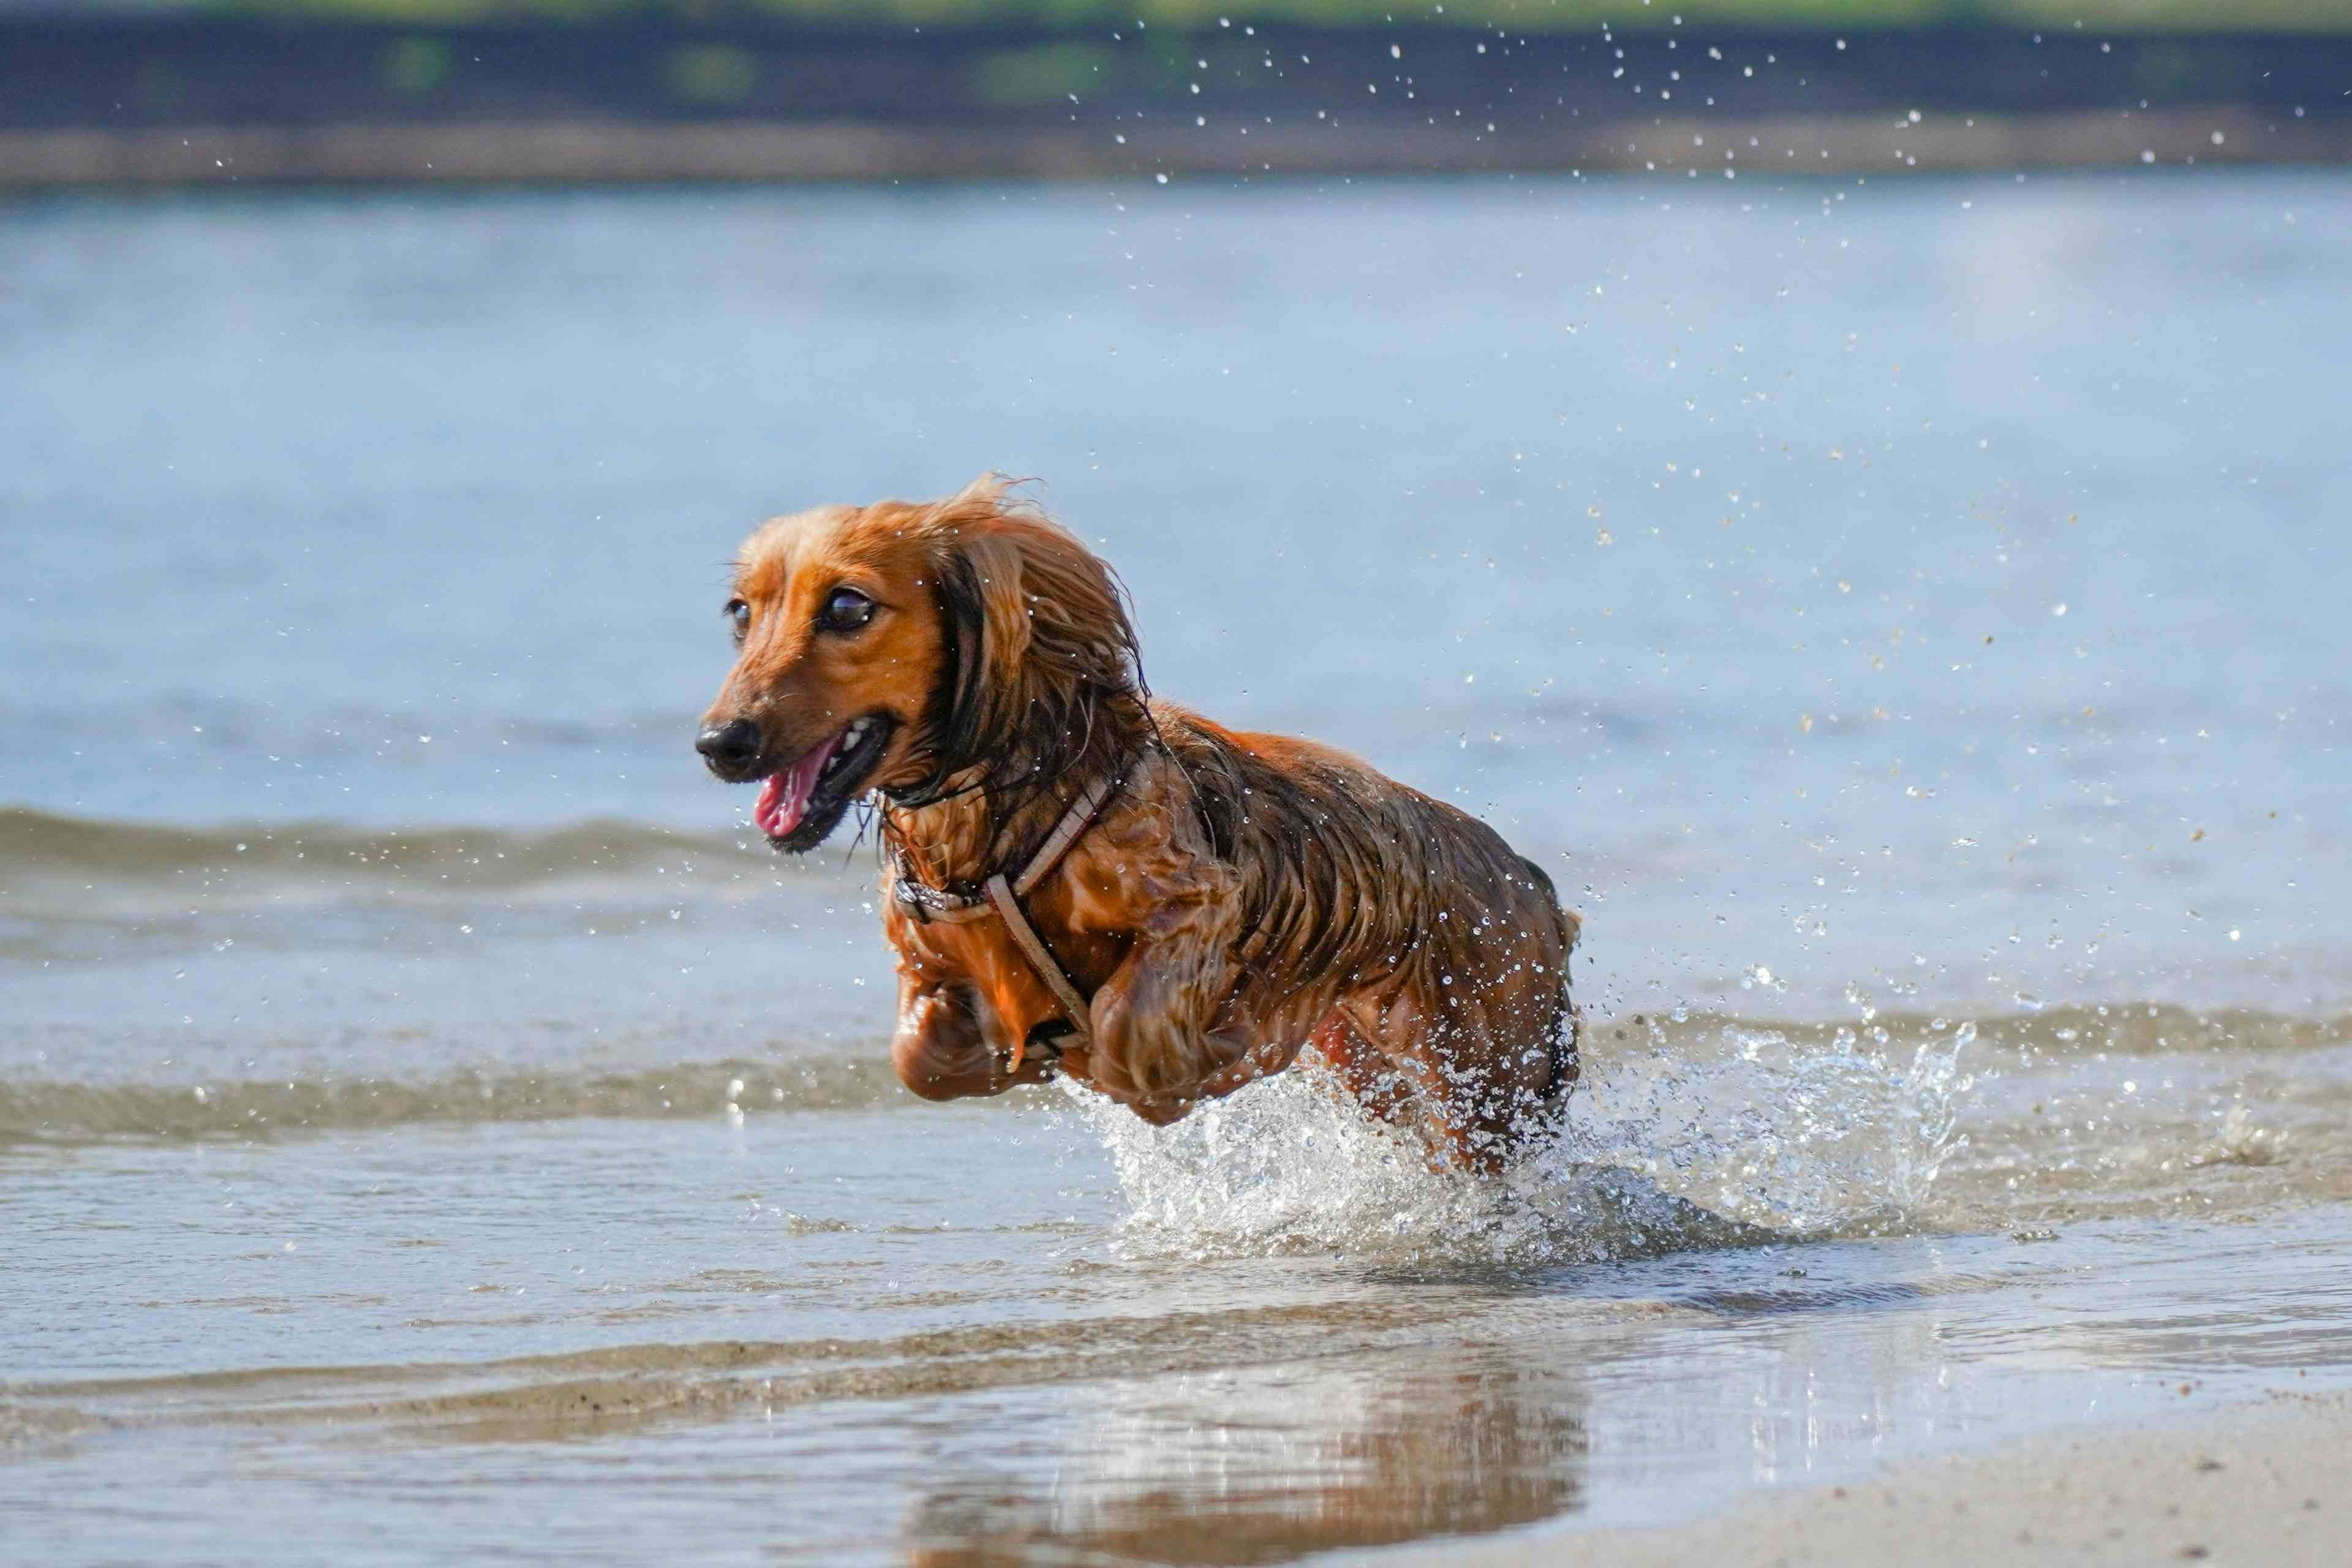 Water intoxication in dogs – how to recognise the signs and act